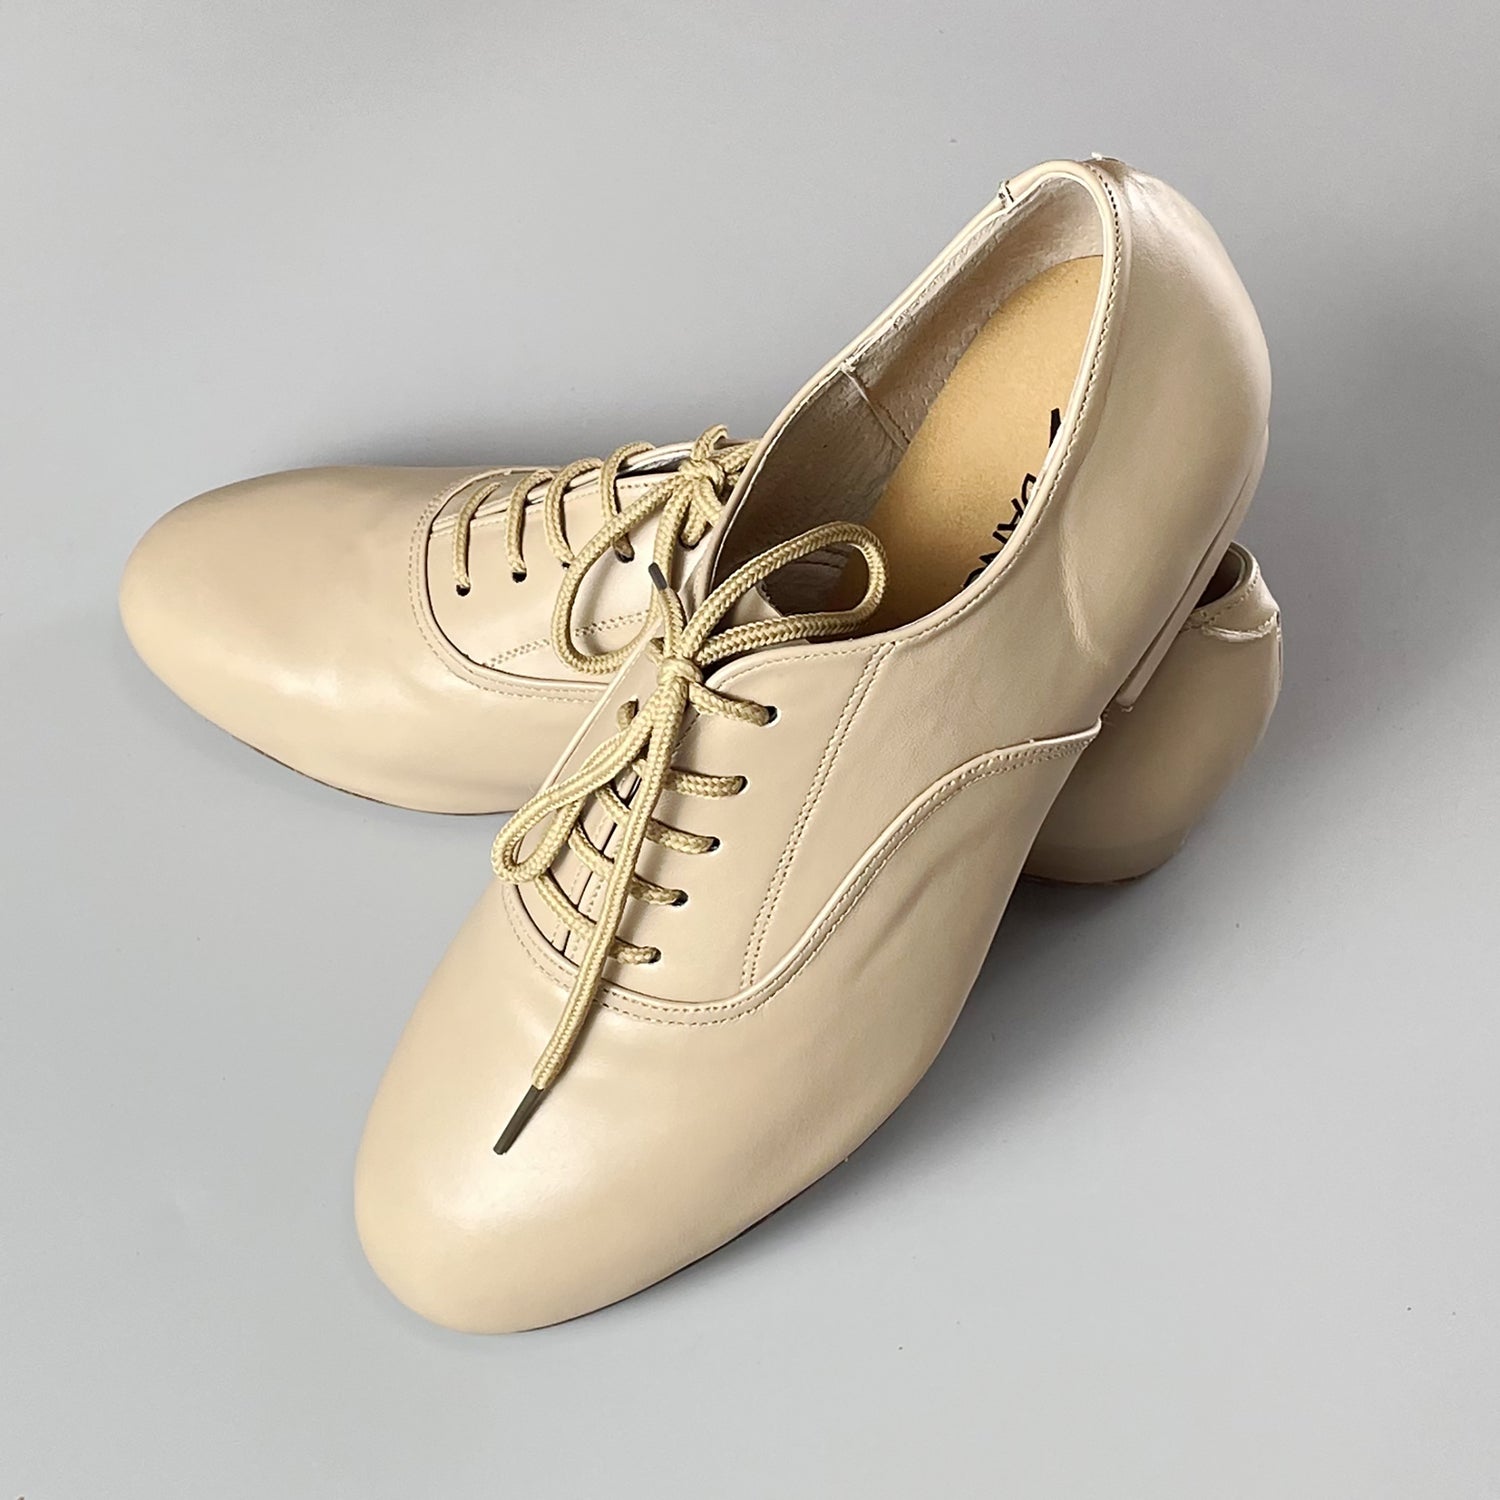 Pro Dancer Men's Tango Shoes with 1 inch Heel, Leather, Lace-up in Nude color2